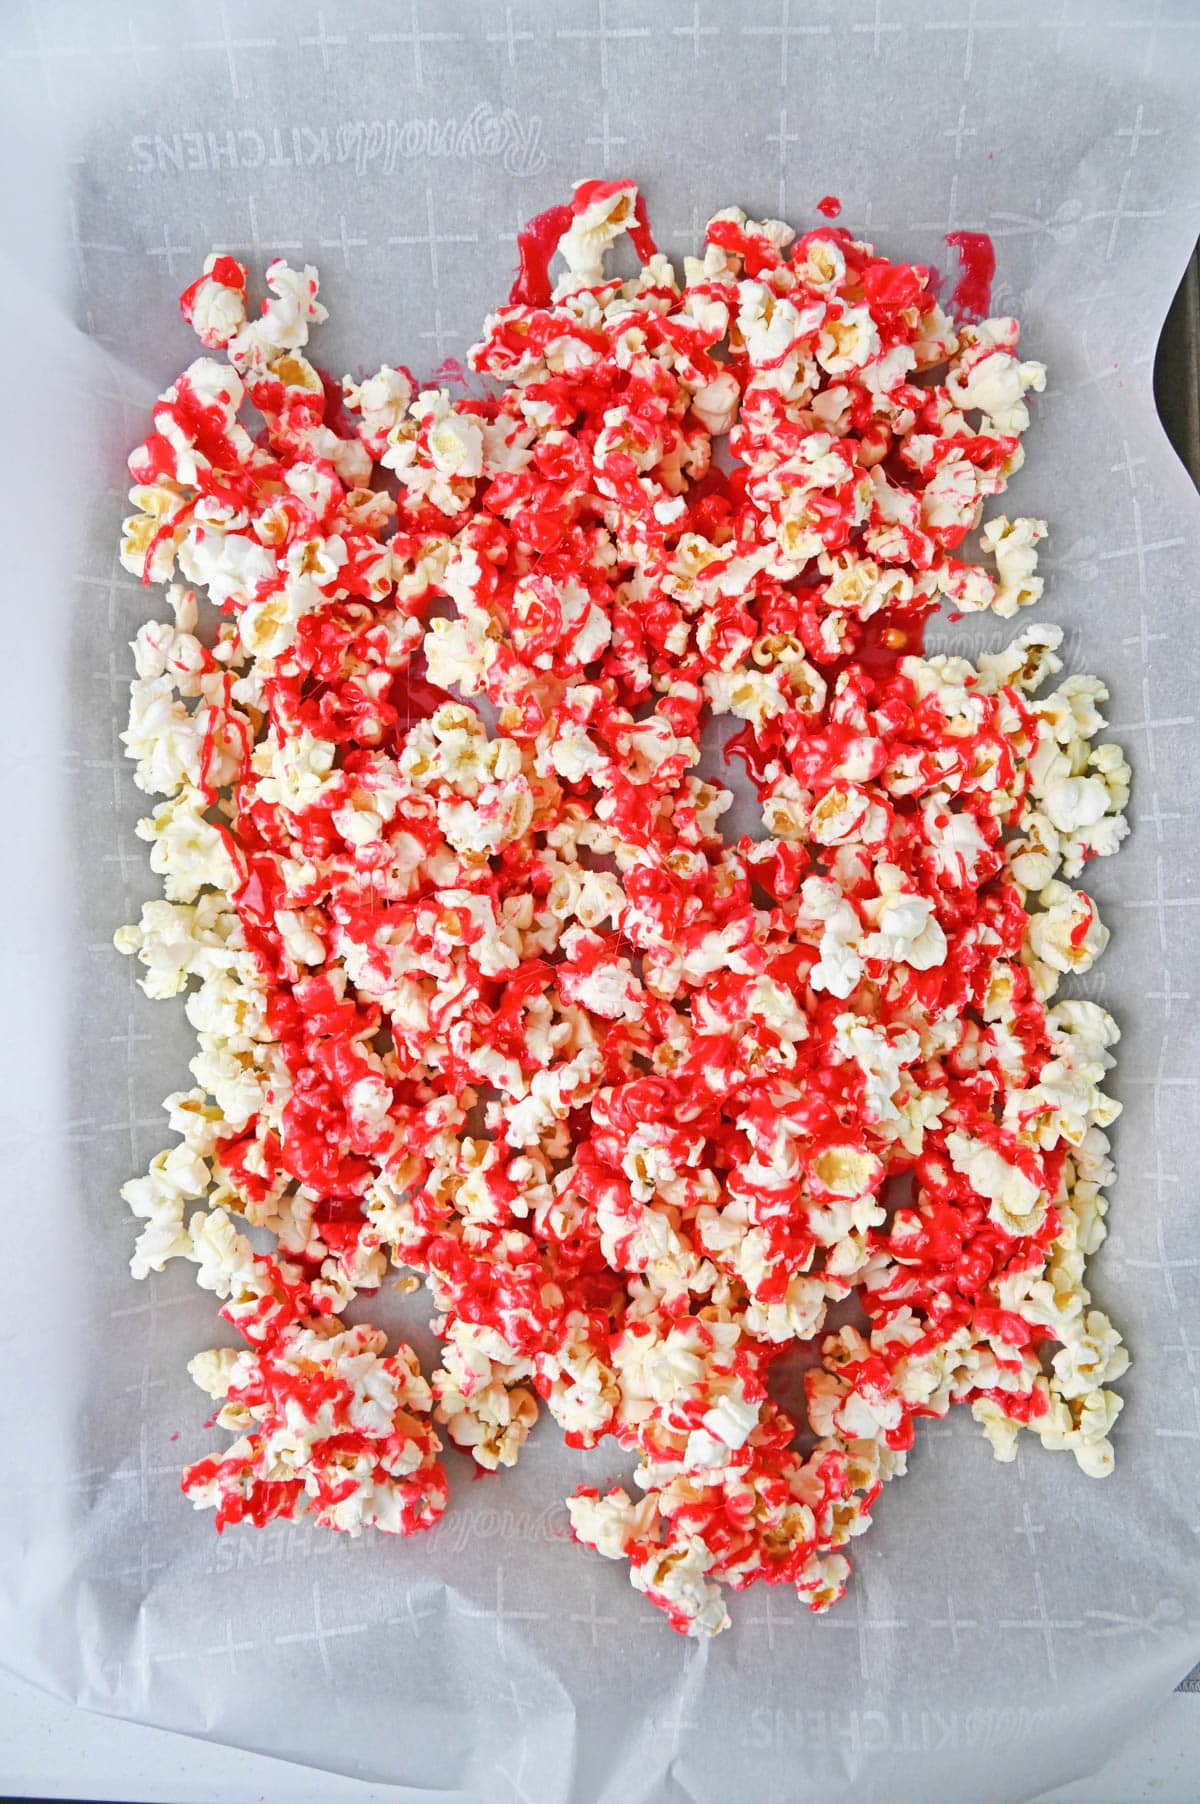 Popcorn with strawberry jello mixed in